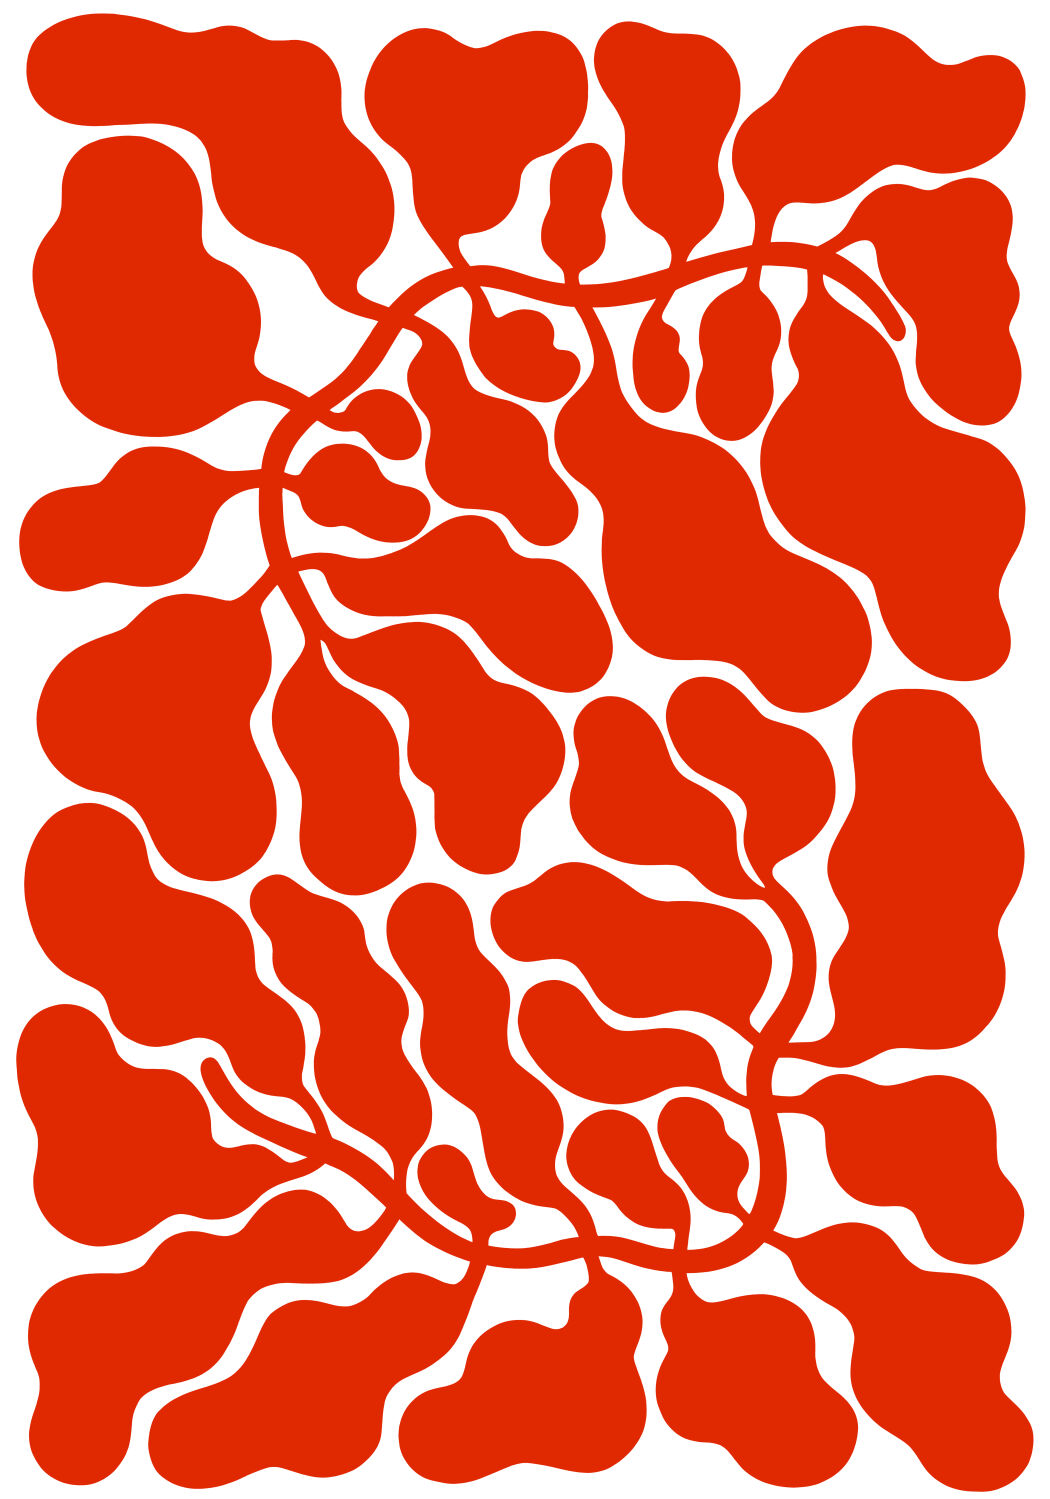 Digital illustration, botanical red pattern by Linnéa Andersson